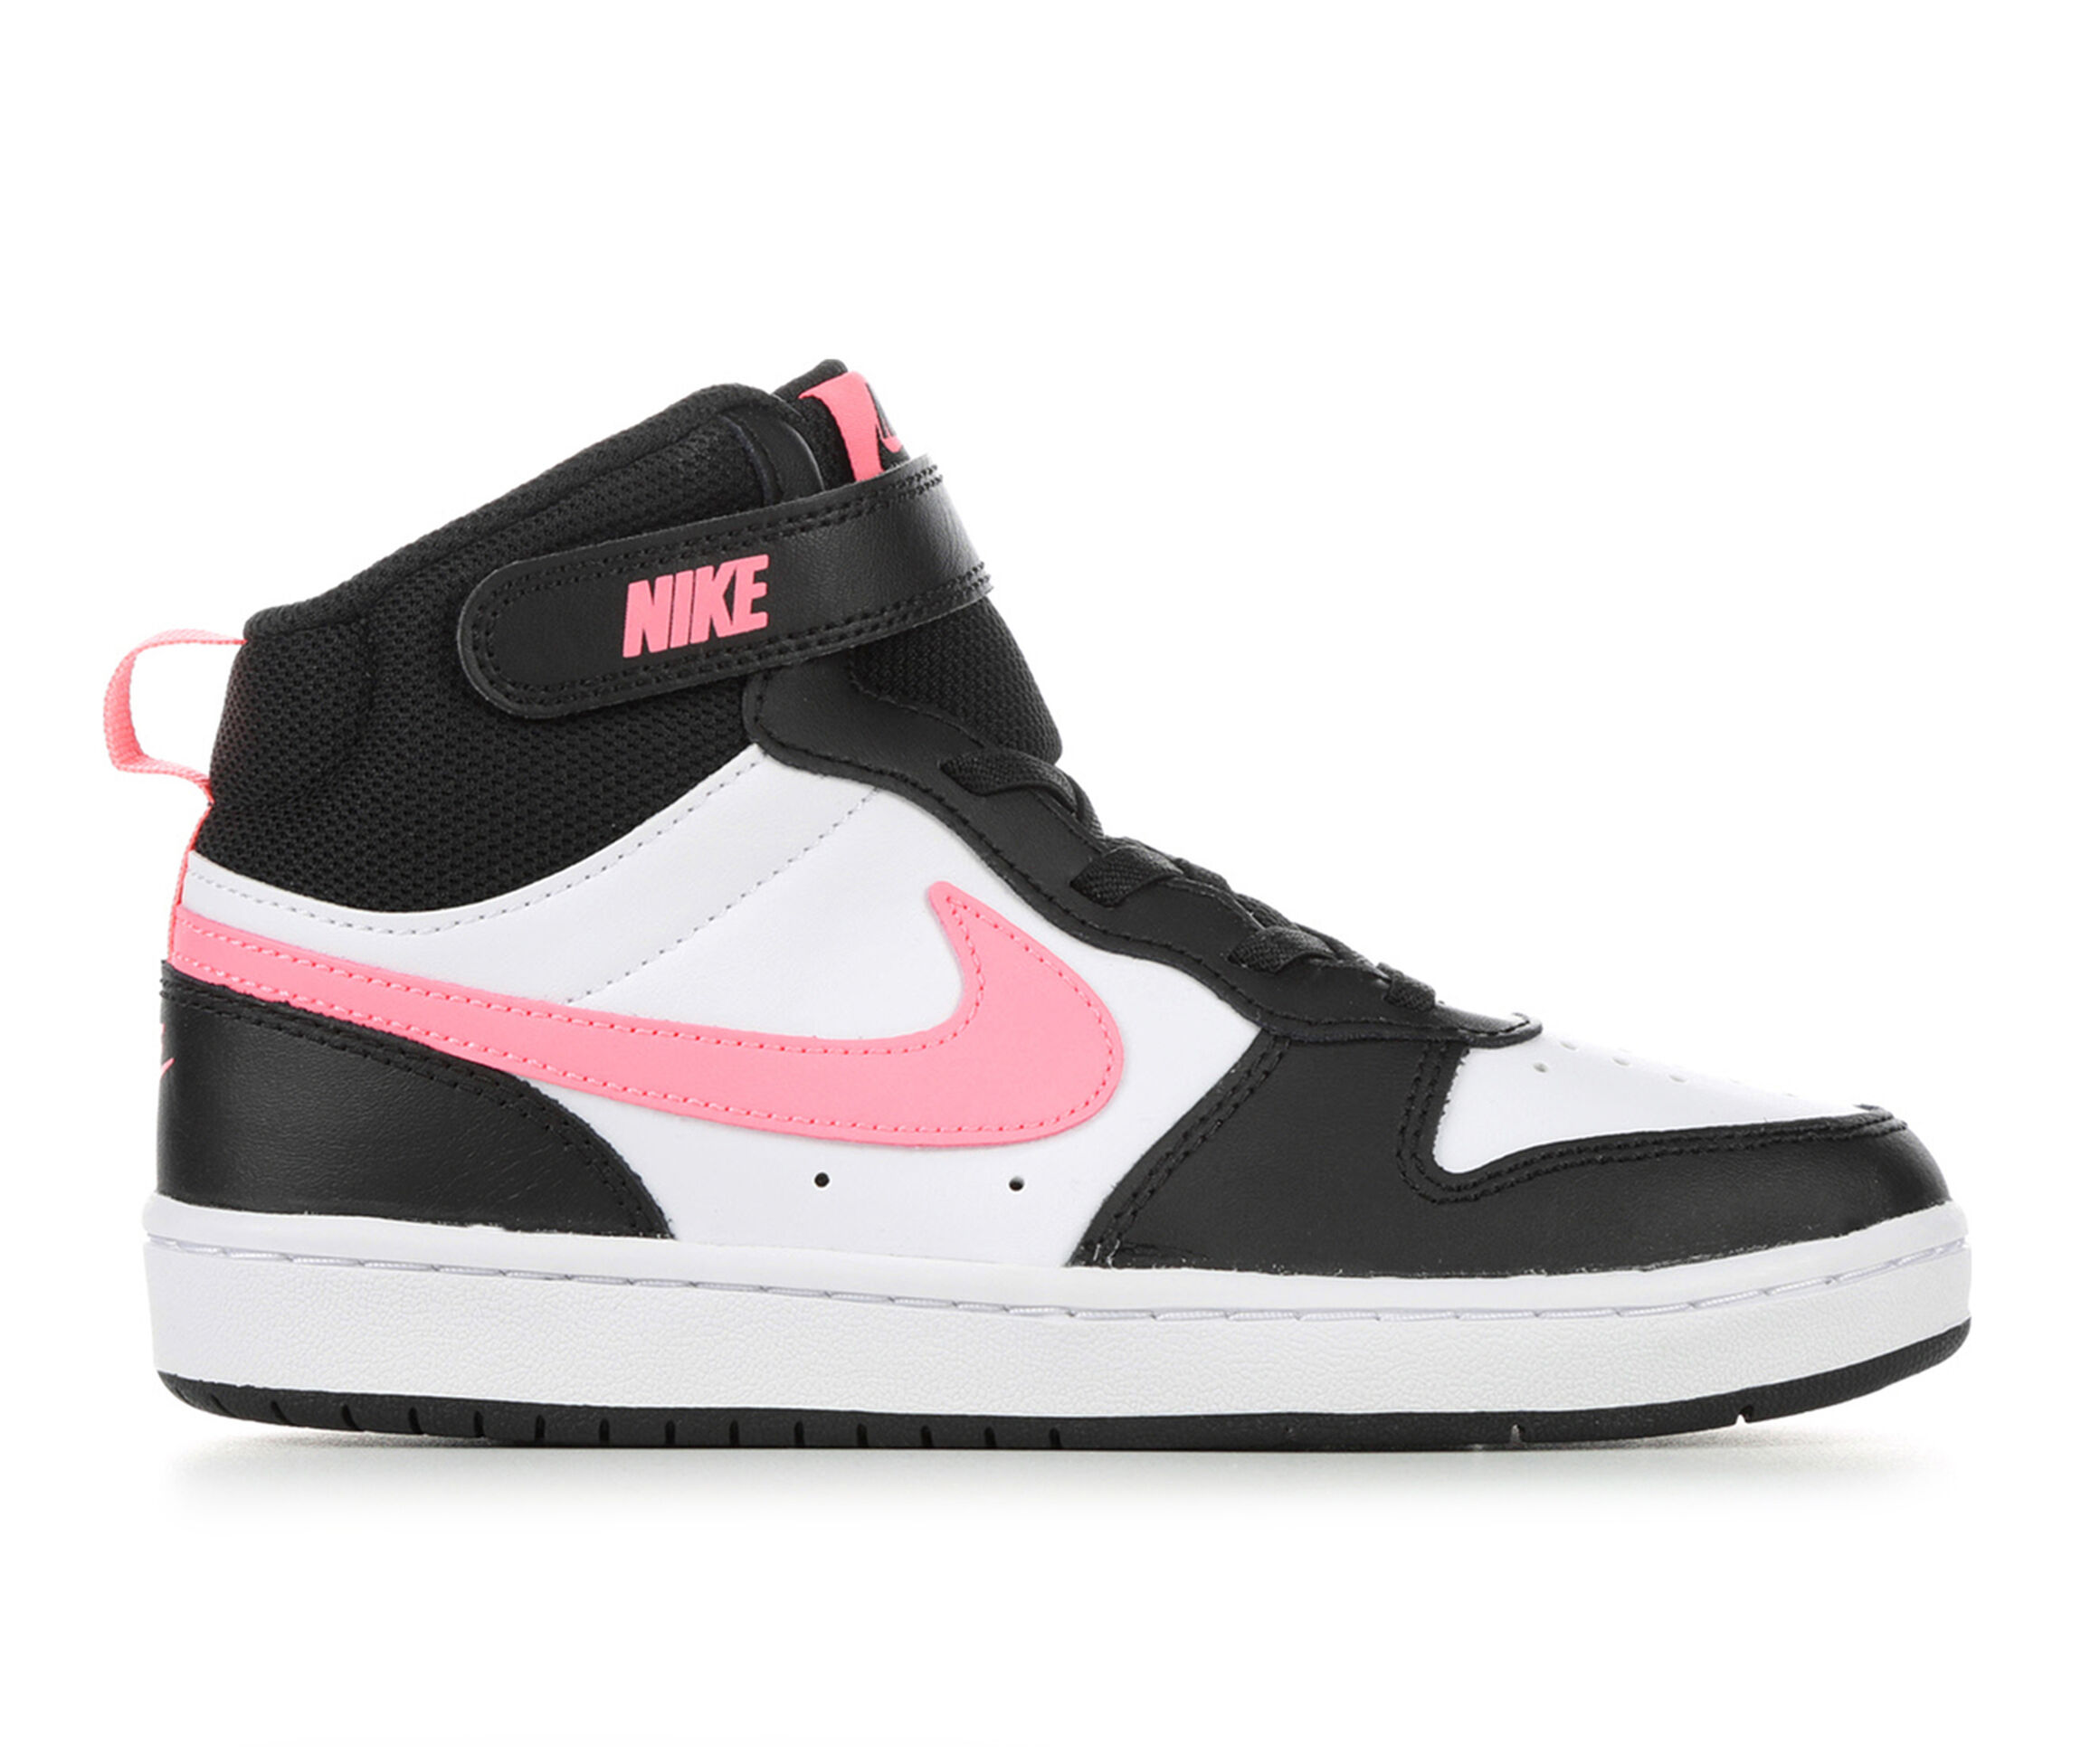 Nike Shoes & Accessories | Shoe Carnival